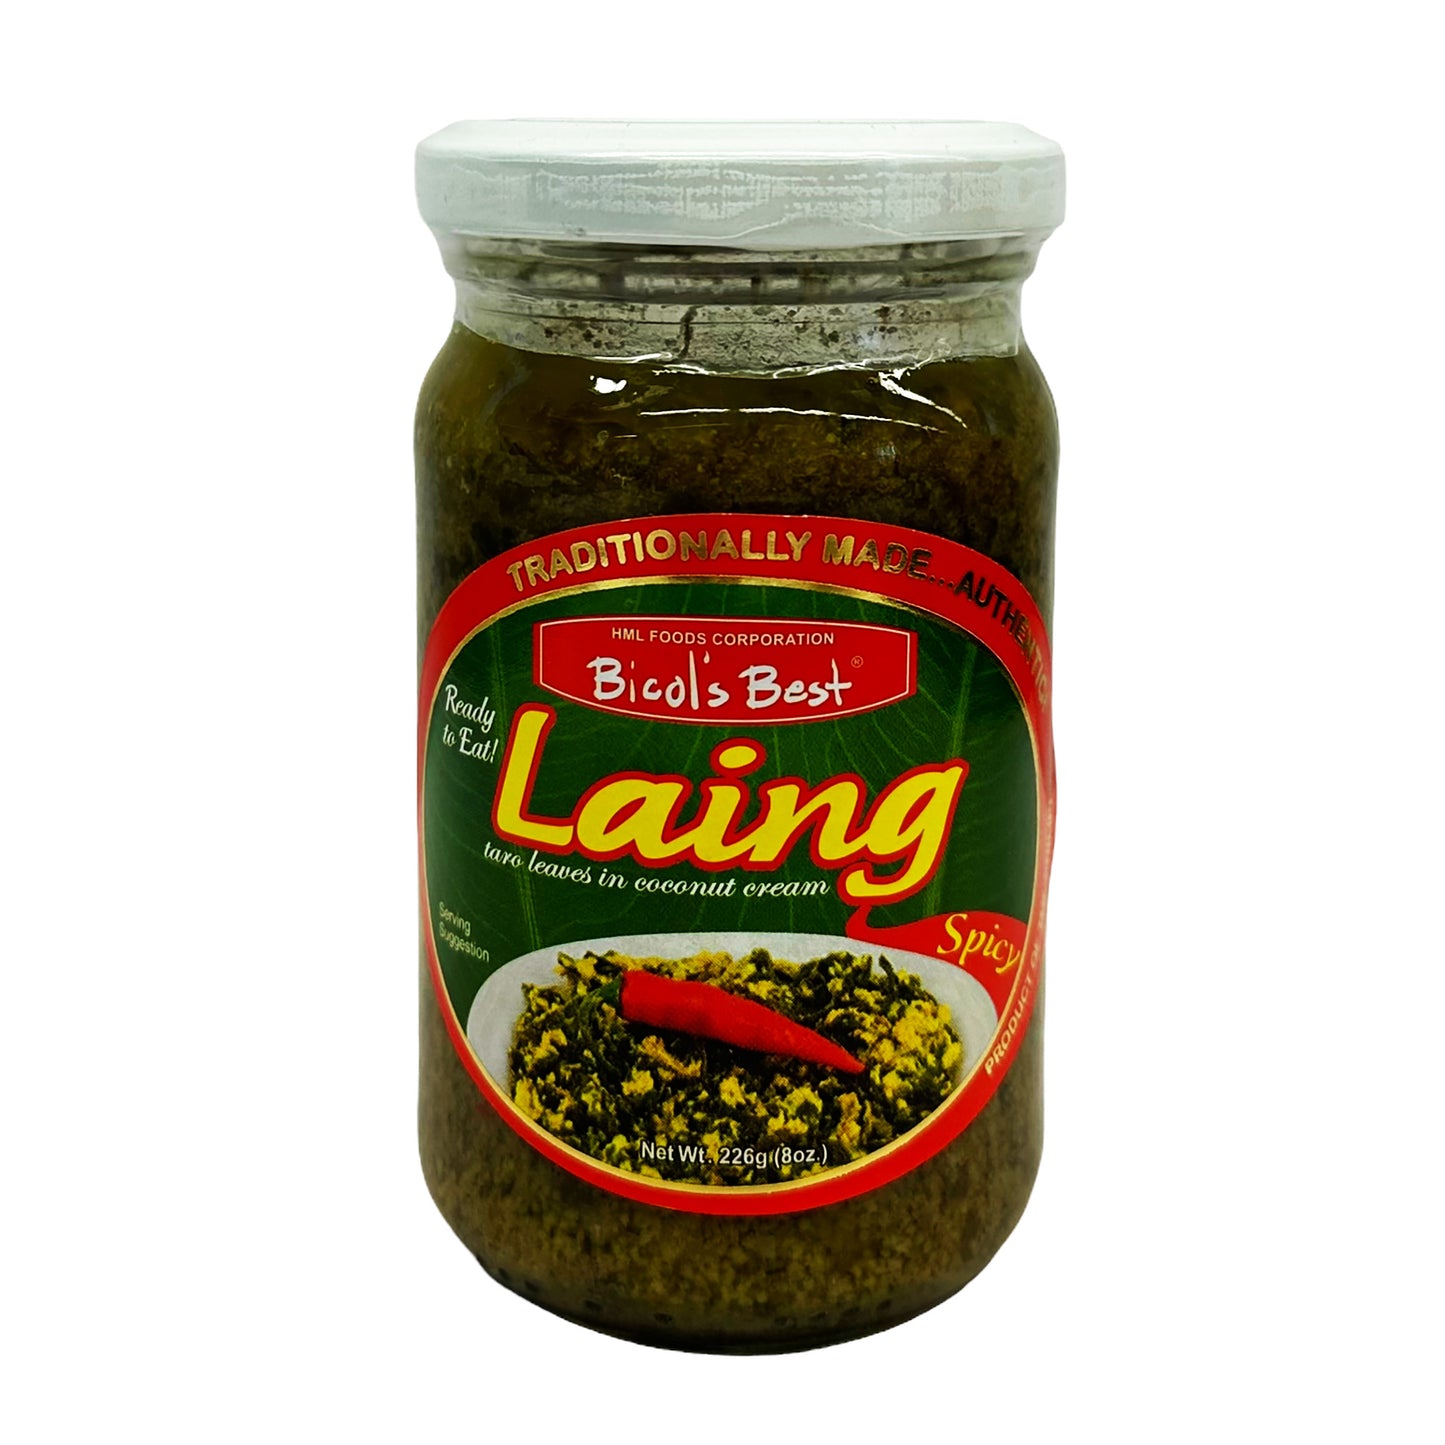 Front graphic image of Bicol's Best Laing Taro Leaves in Coconut Cream - Spicy 8oz (226g)